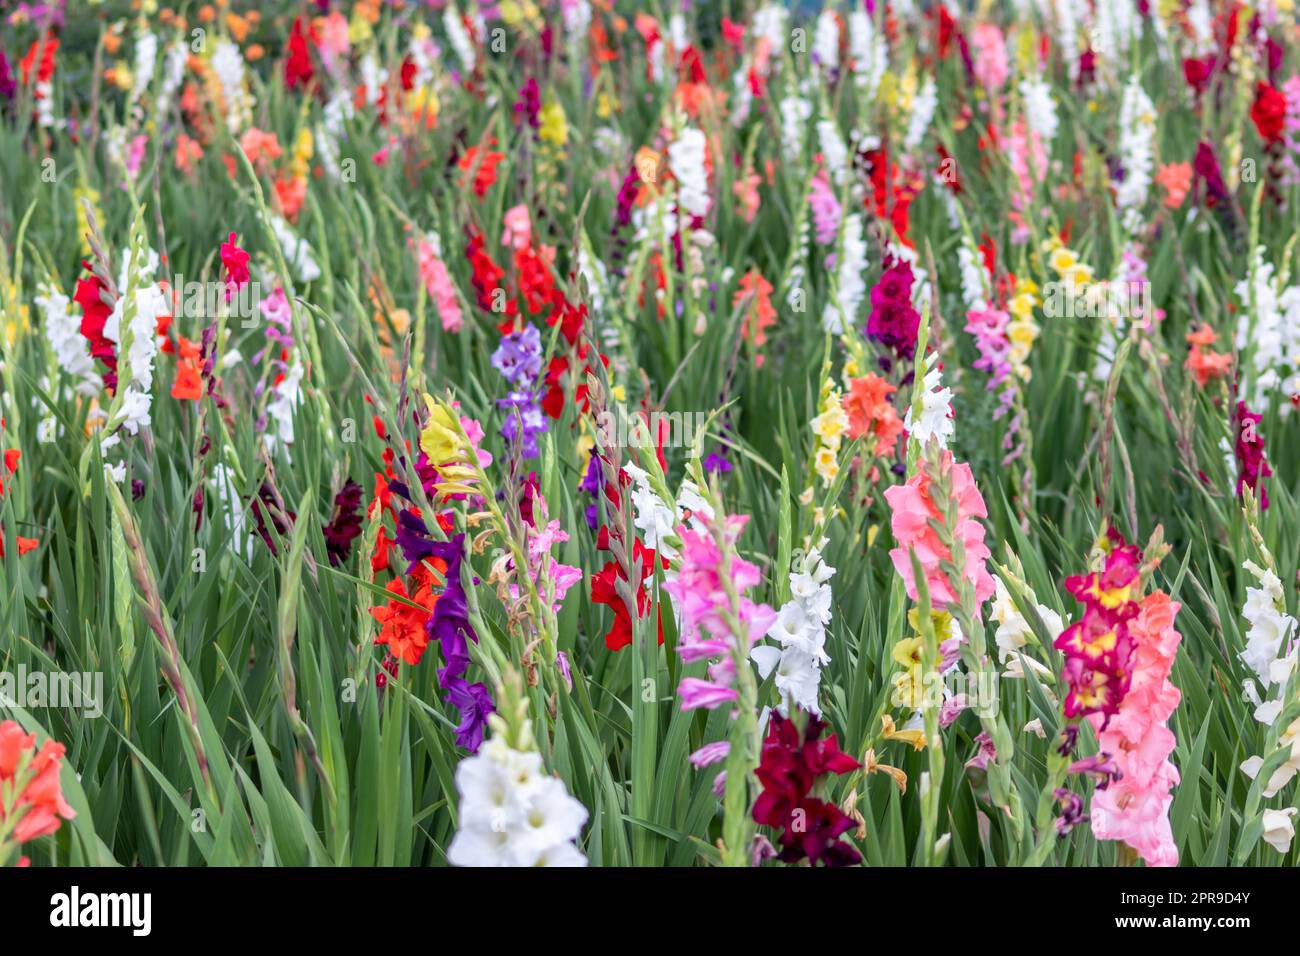 Field of flowers to cut by yourself in intense colors and vibrant colors shows the summer from floral and colorful side with different flowers and many colorful blossoms for mothers day or valentines Stock Photo